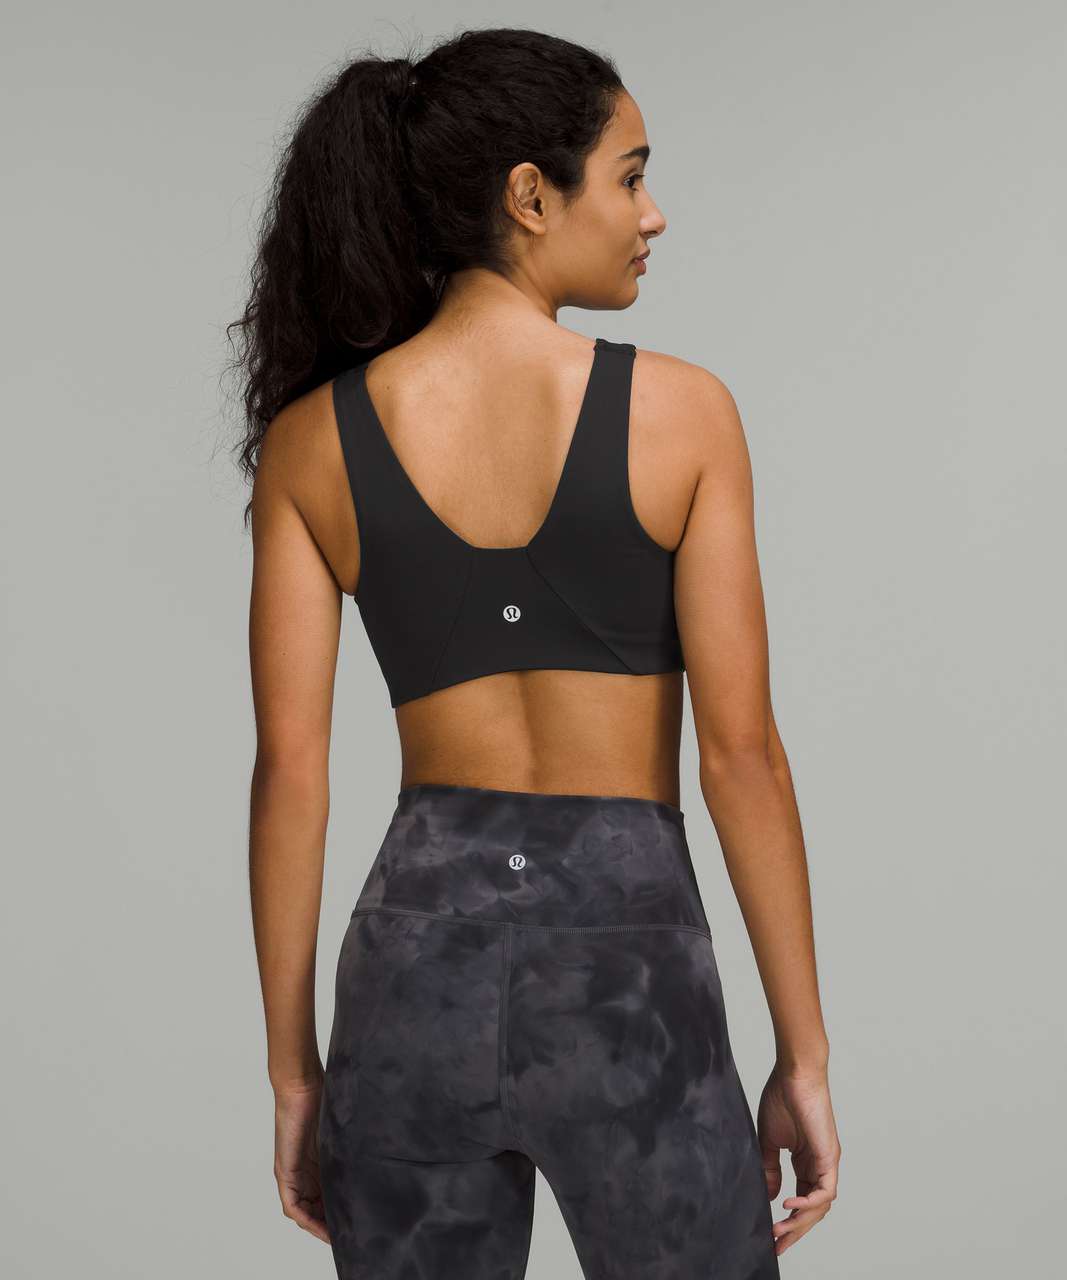 Lululemon Tank Top With Attached Sports Bra Black Size XS - $28 (44% Off  Retail) - From Rianna